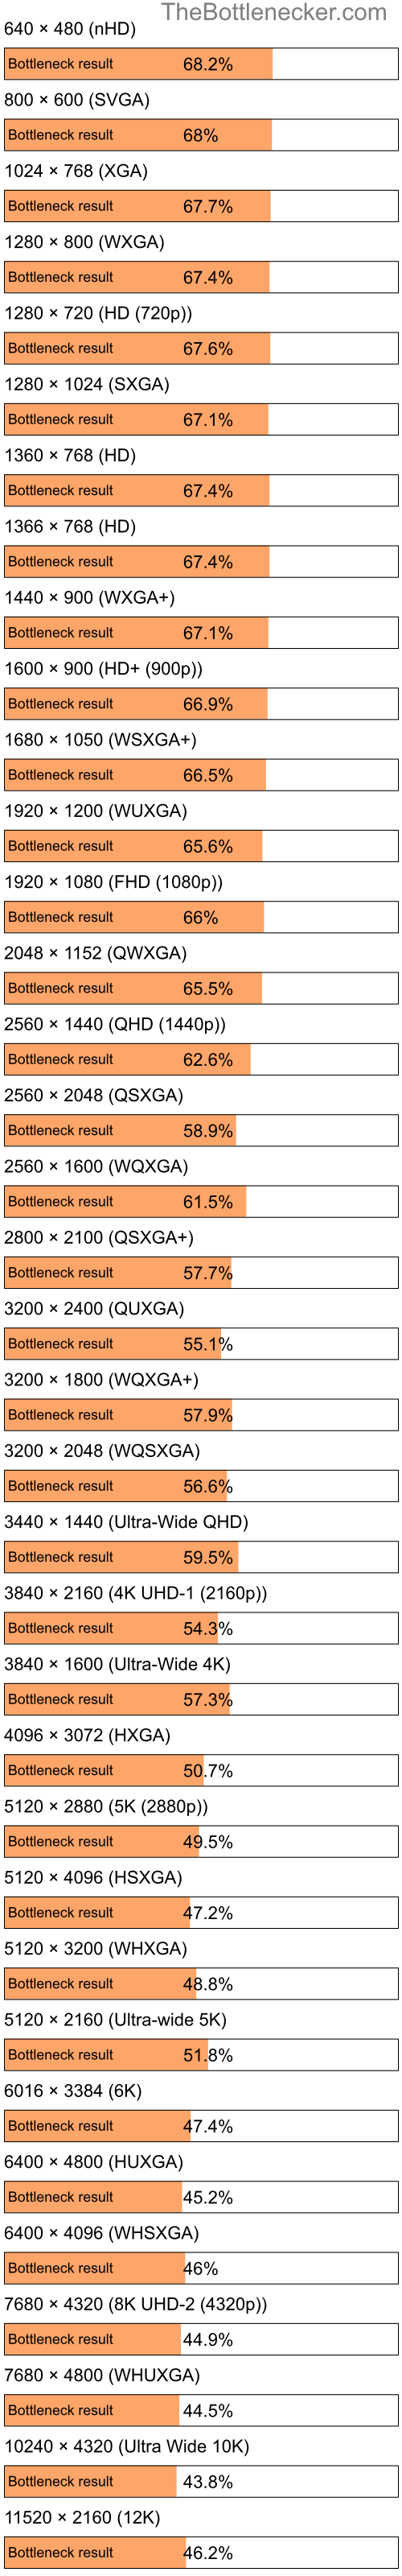 Bottleneck results by resolution for Intel Xeon E5640 and NVIDIA GeForce RTX 4090 in Graphic Card Intense Tasks